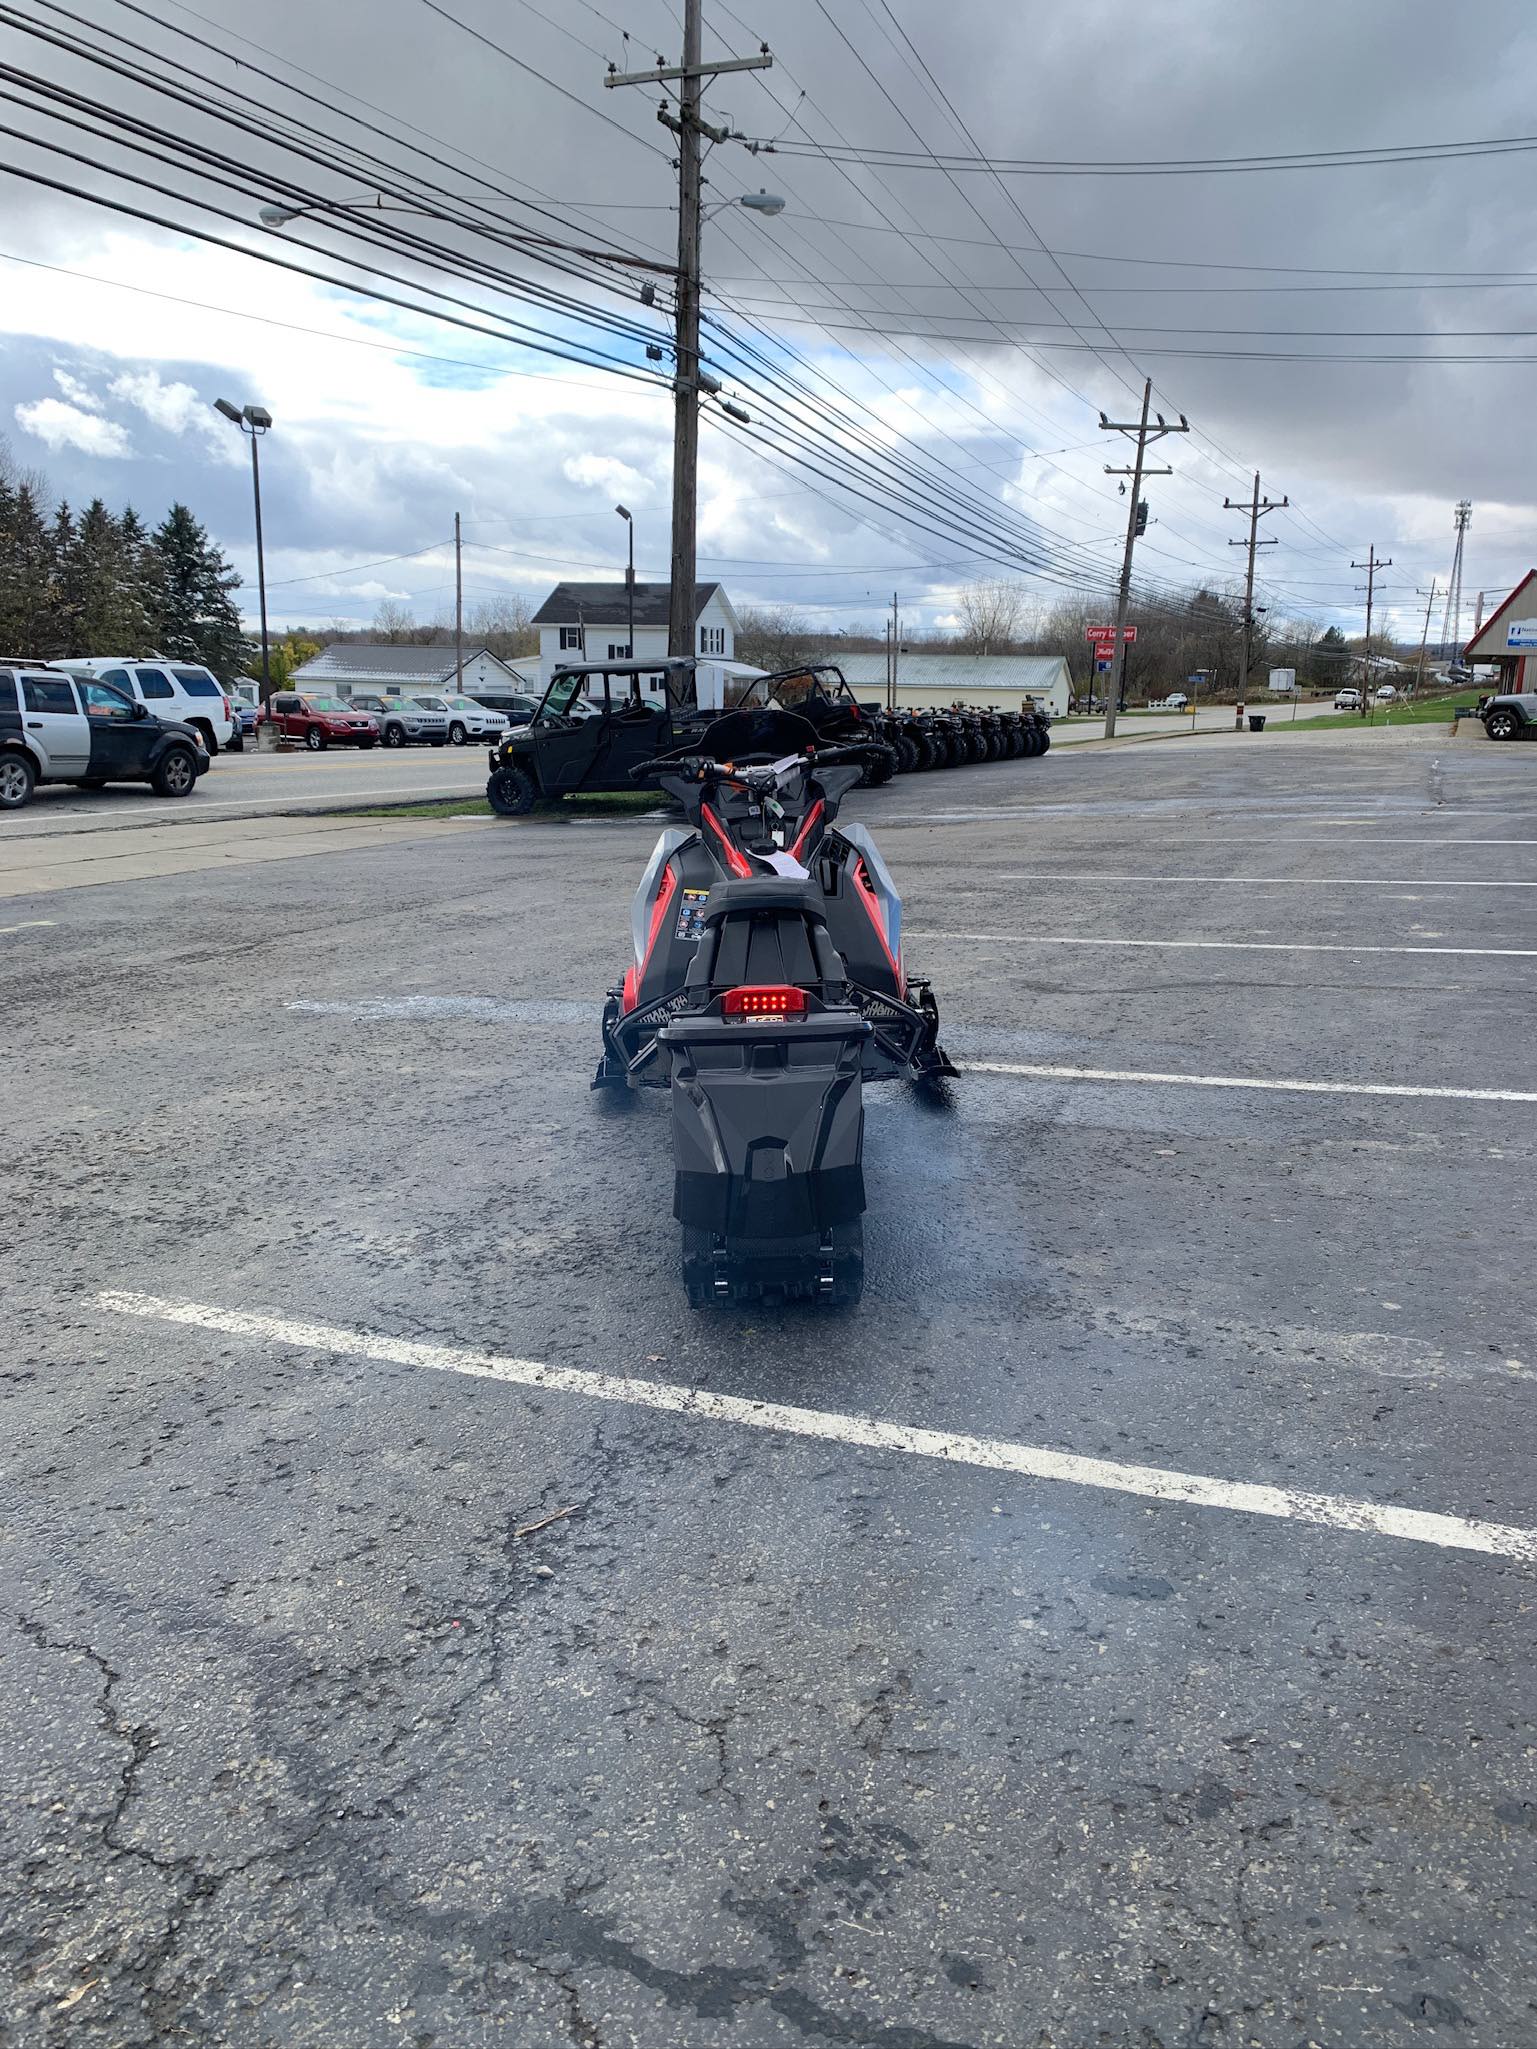 2024 Polaris INDY XC 129 650 at Leisure Time Powersports of Corry